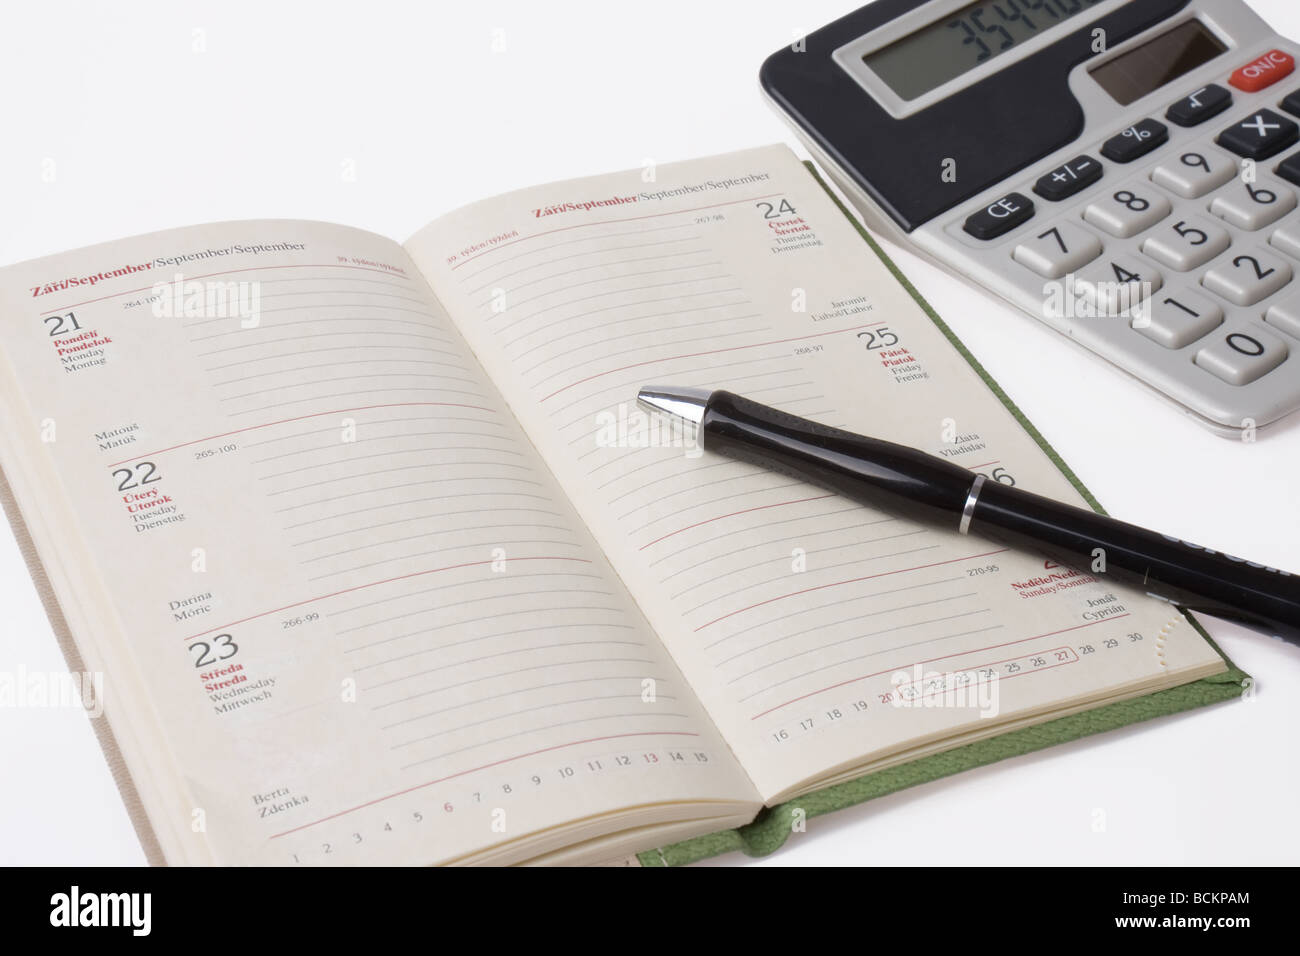 business calculator and diary with pen on white background Stock Photo